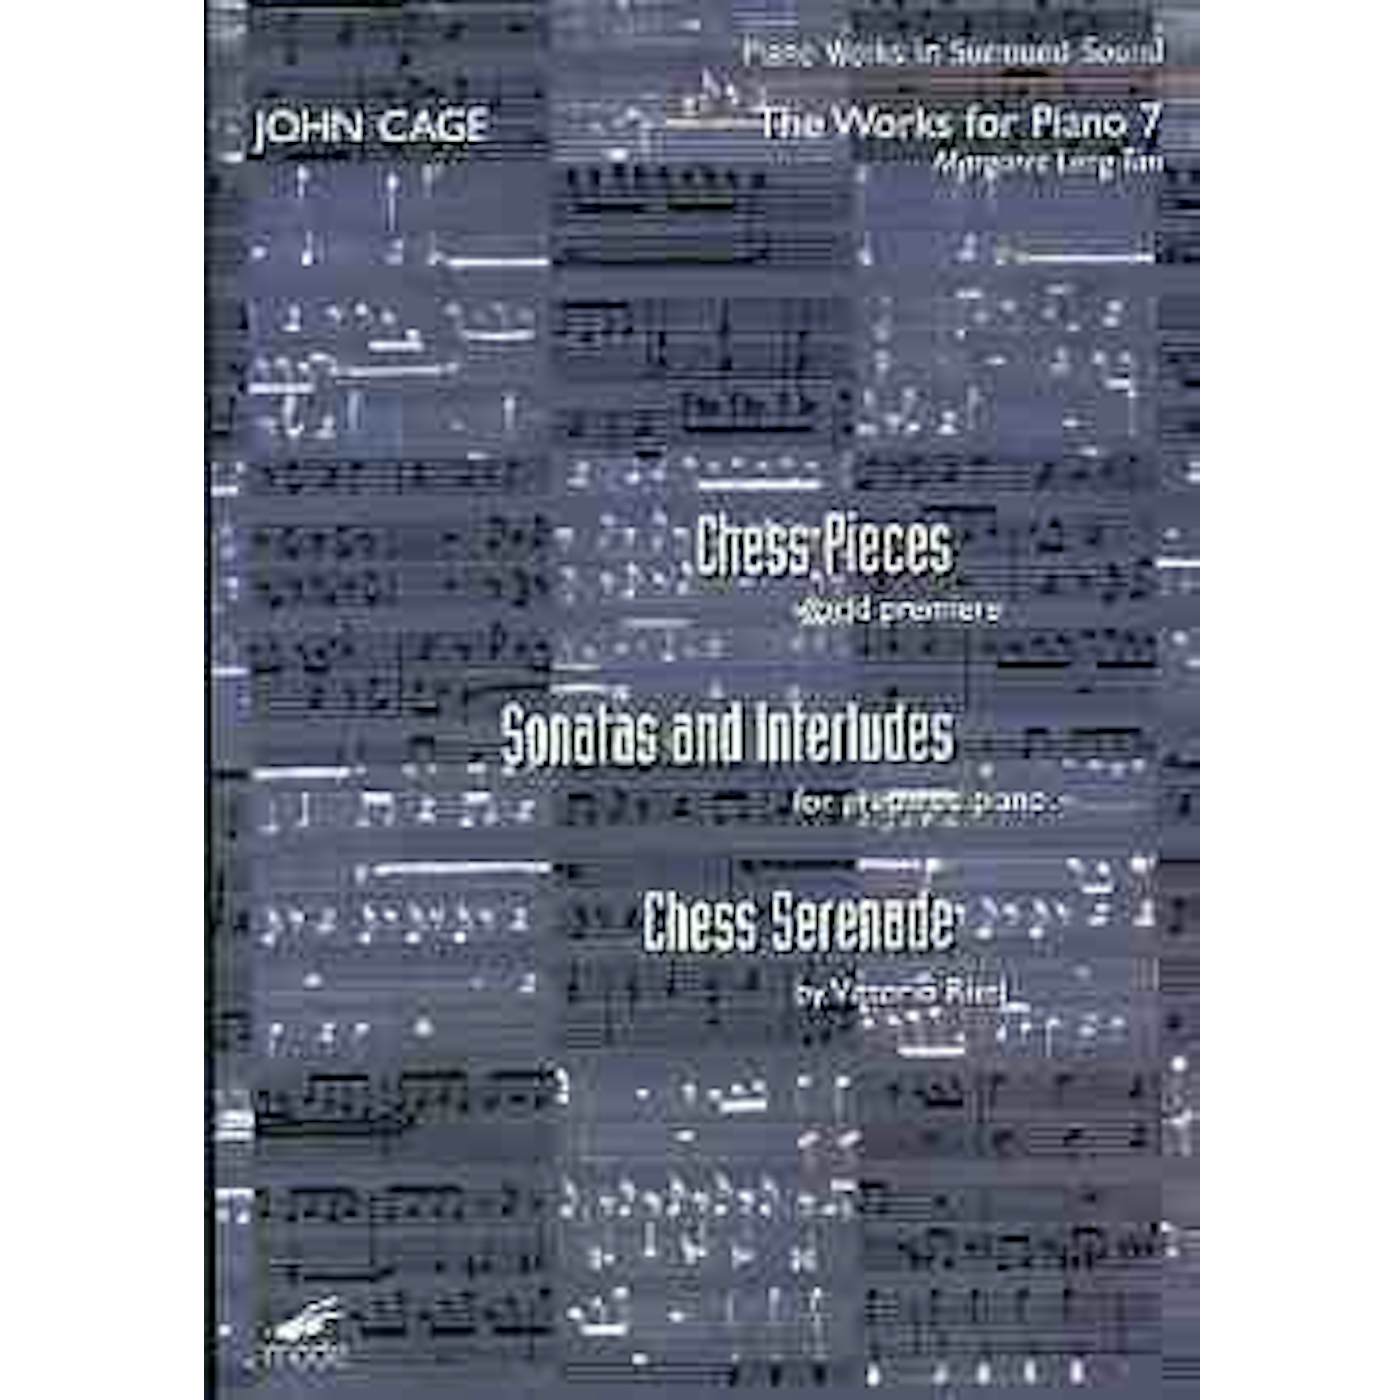 John Cage PIANO WORKS 7 DVD